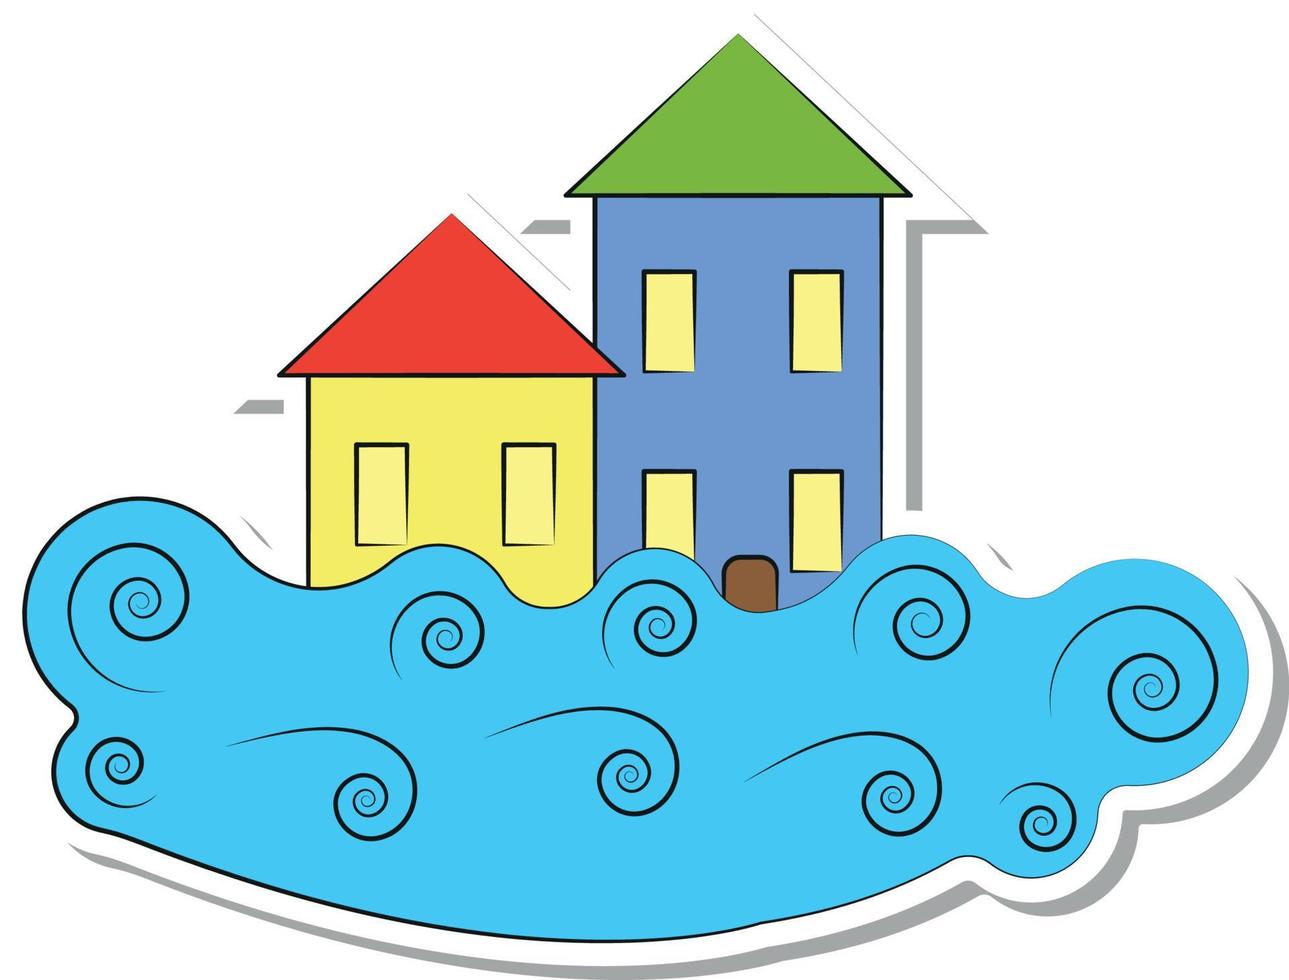 Flood in the City Ecological Disaster Sticker vector